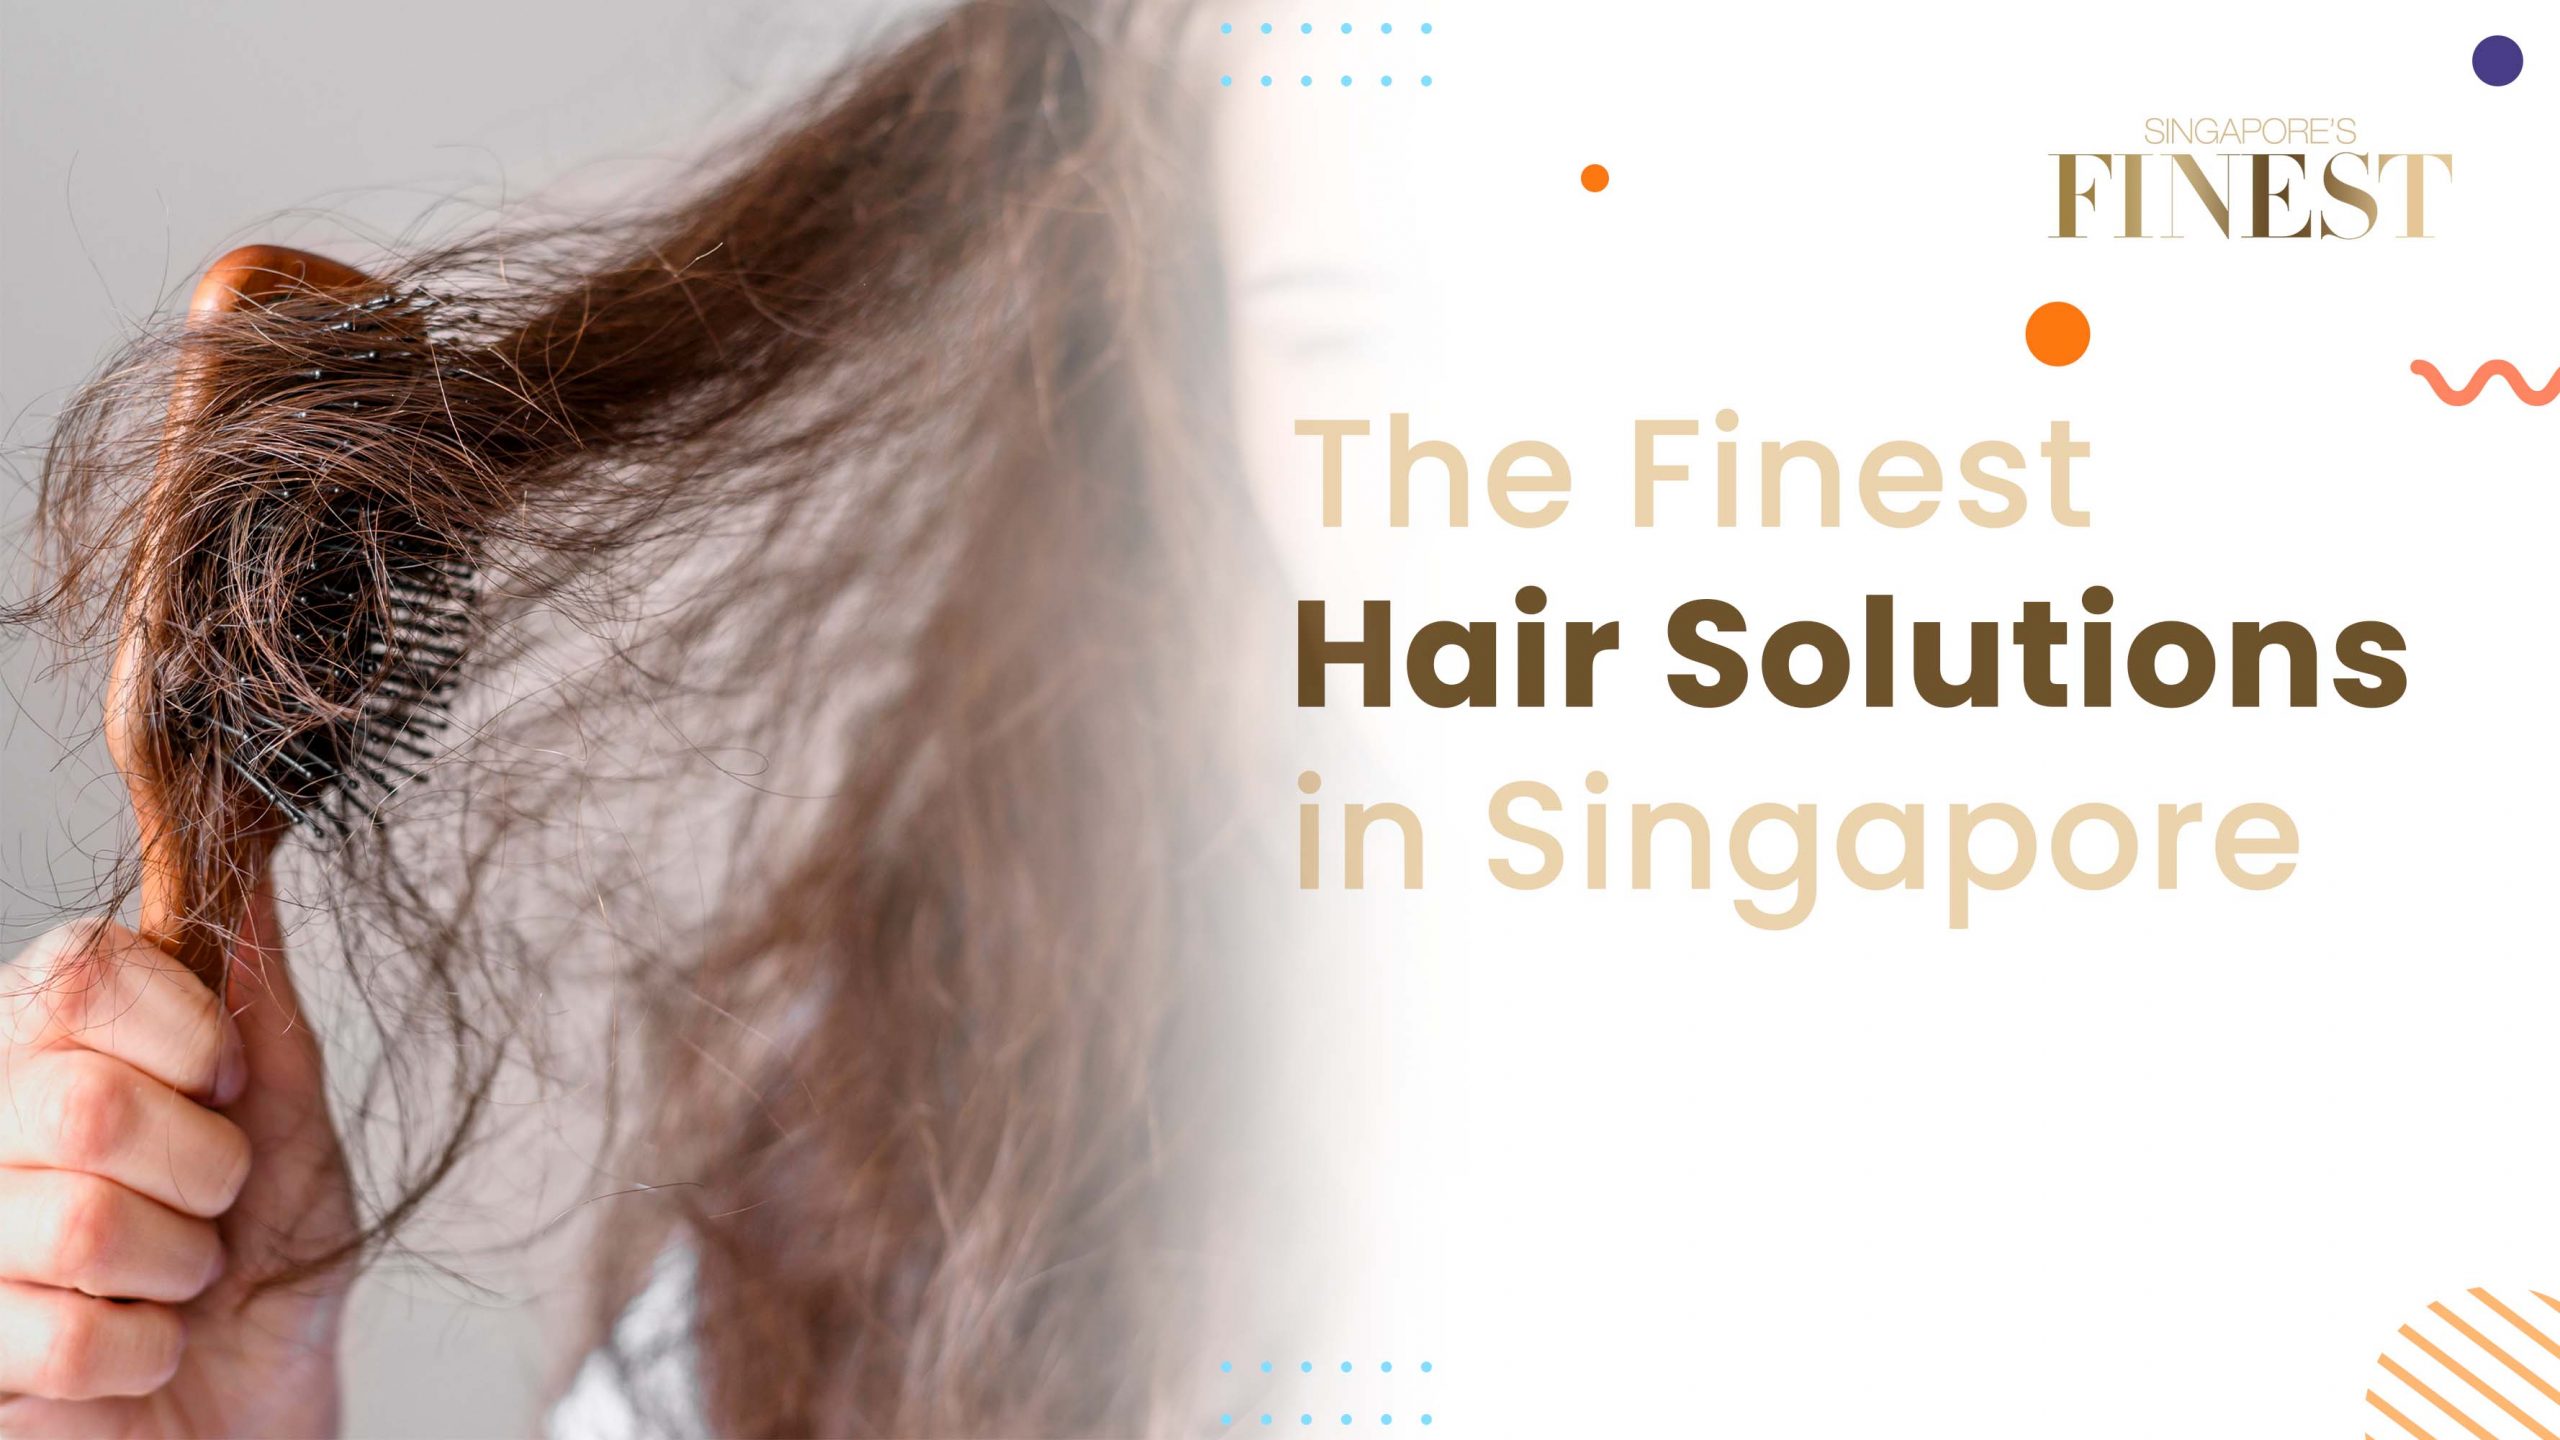 The Finest Hair Solutions in Singapore